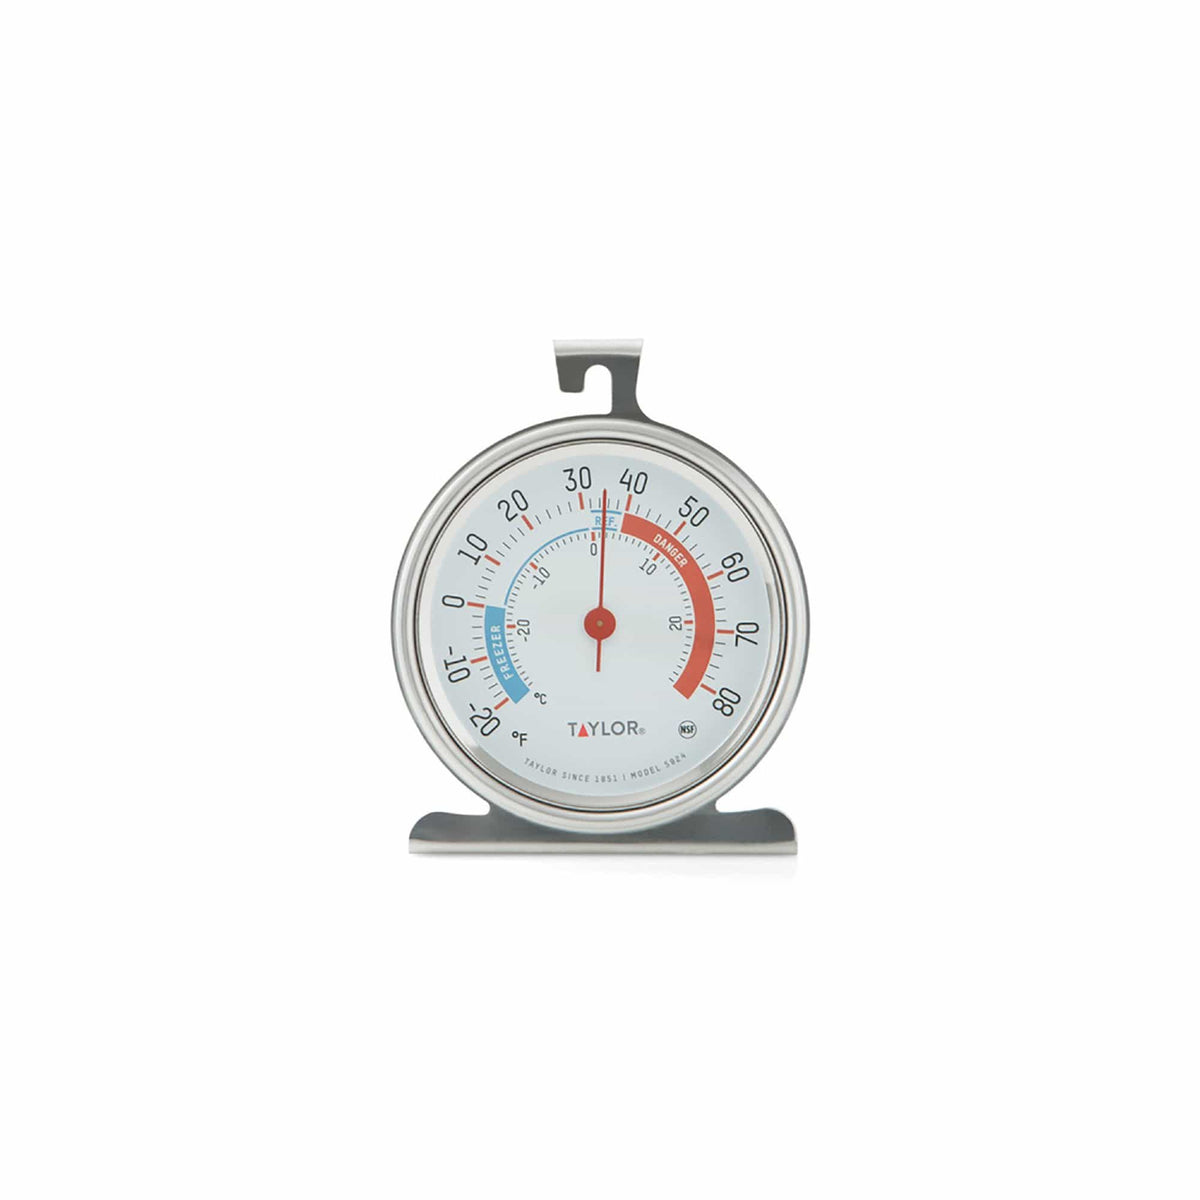 Taylor 5924 Stainless Steel Fridge/Freezer Thermometer, 3" Dial